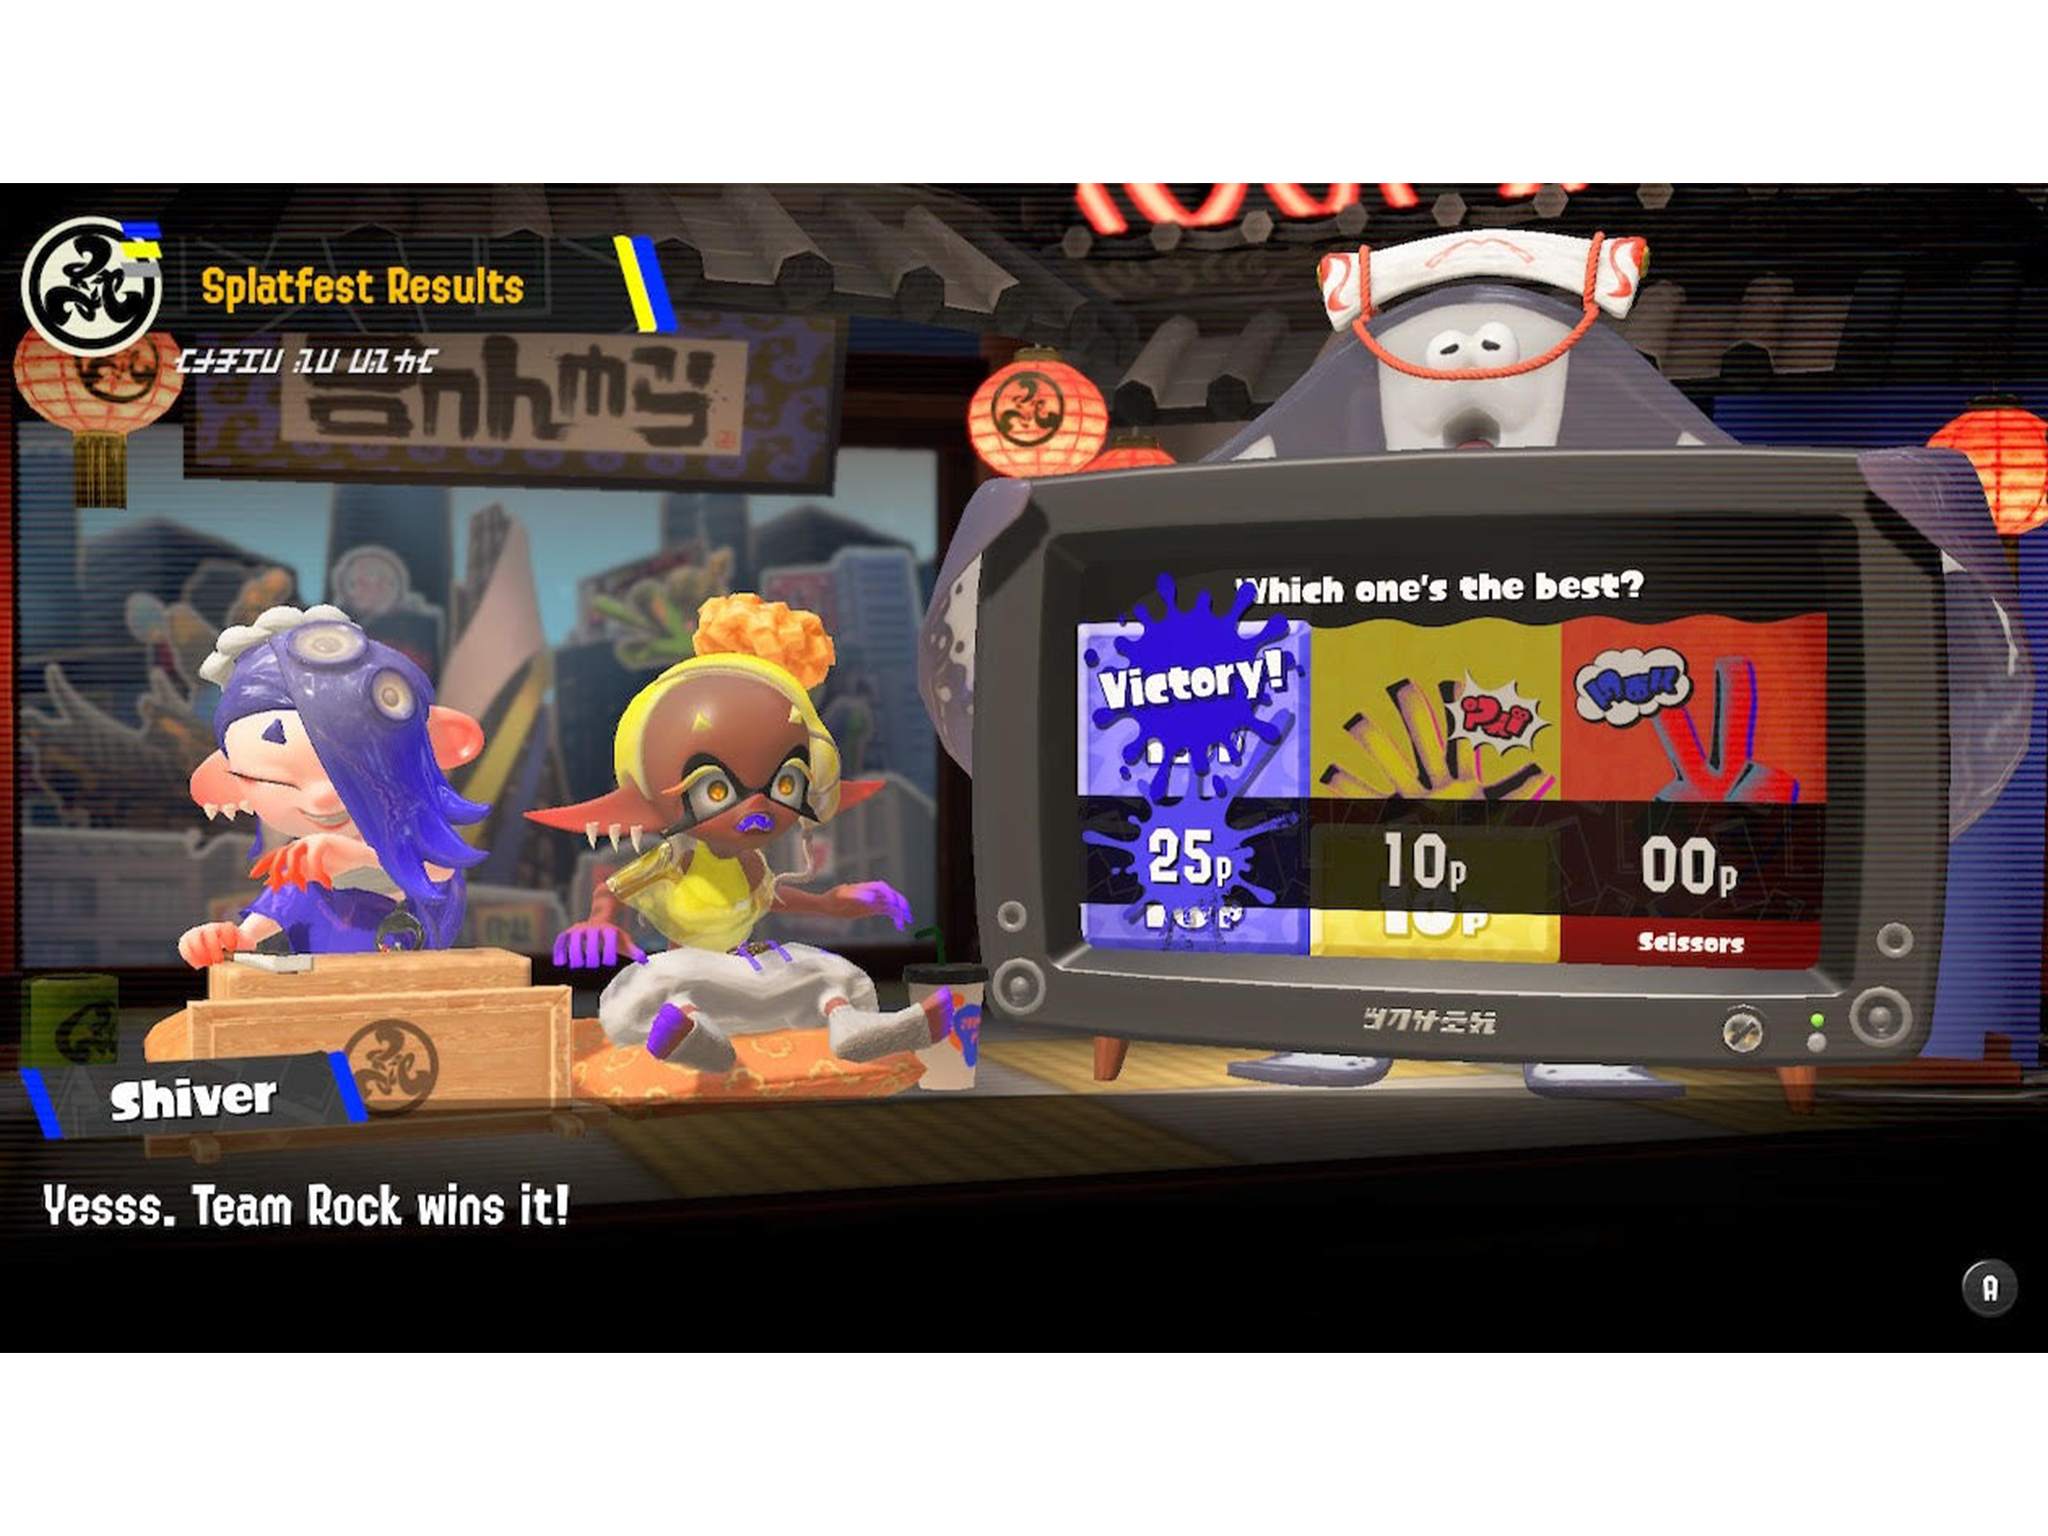 The new and improved Splatfest format is an excellent shake-up to the formula